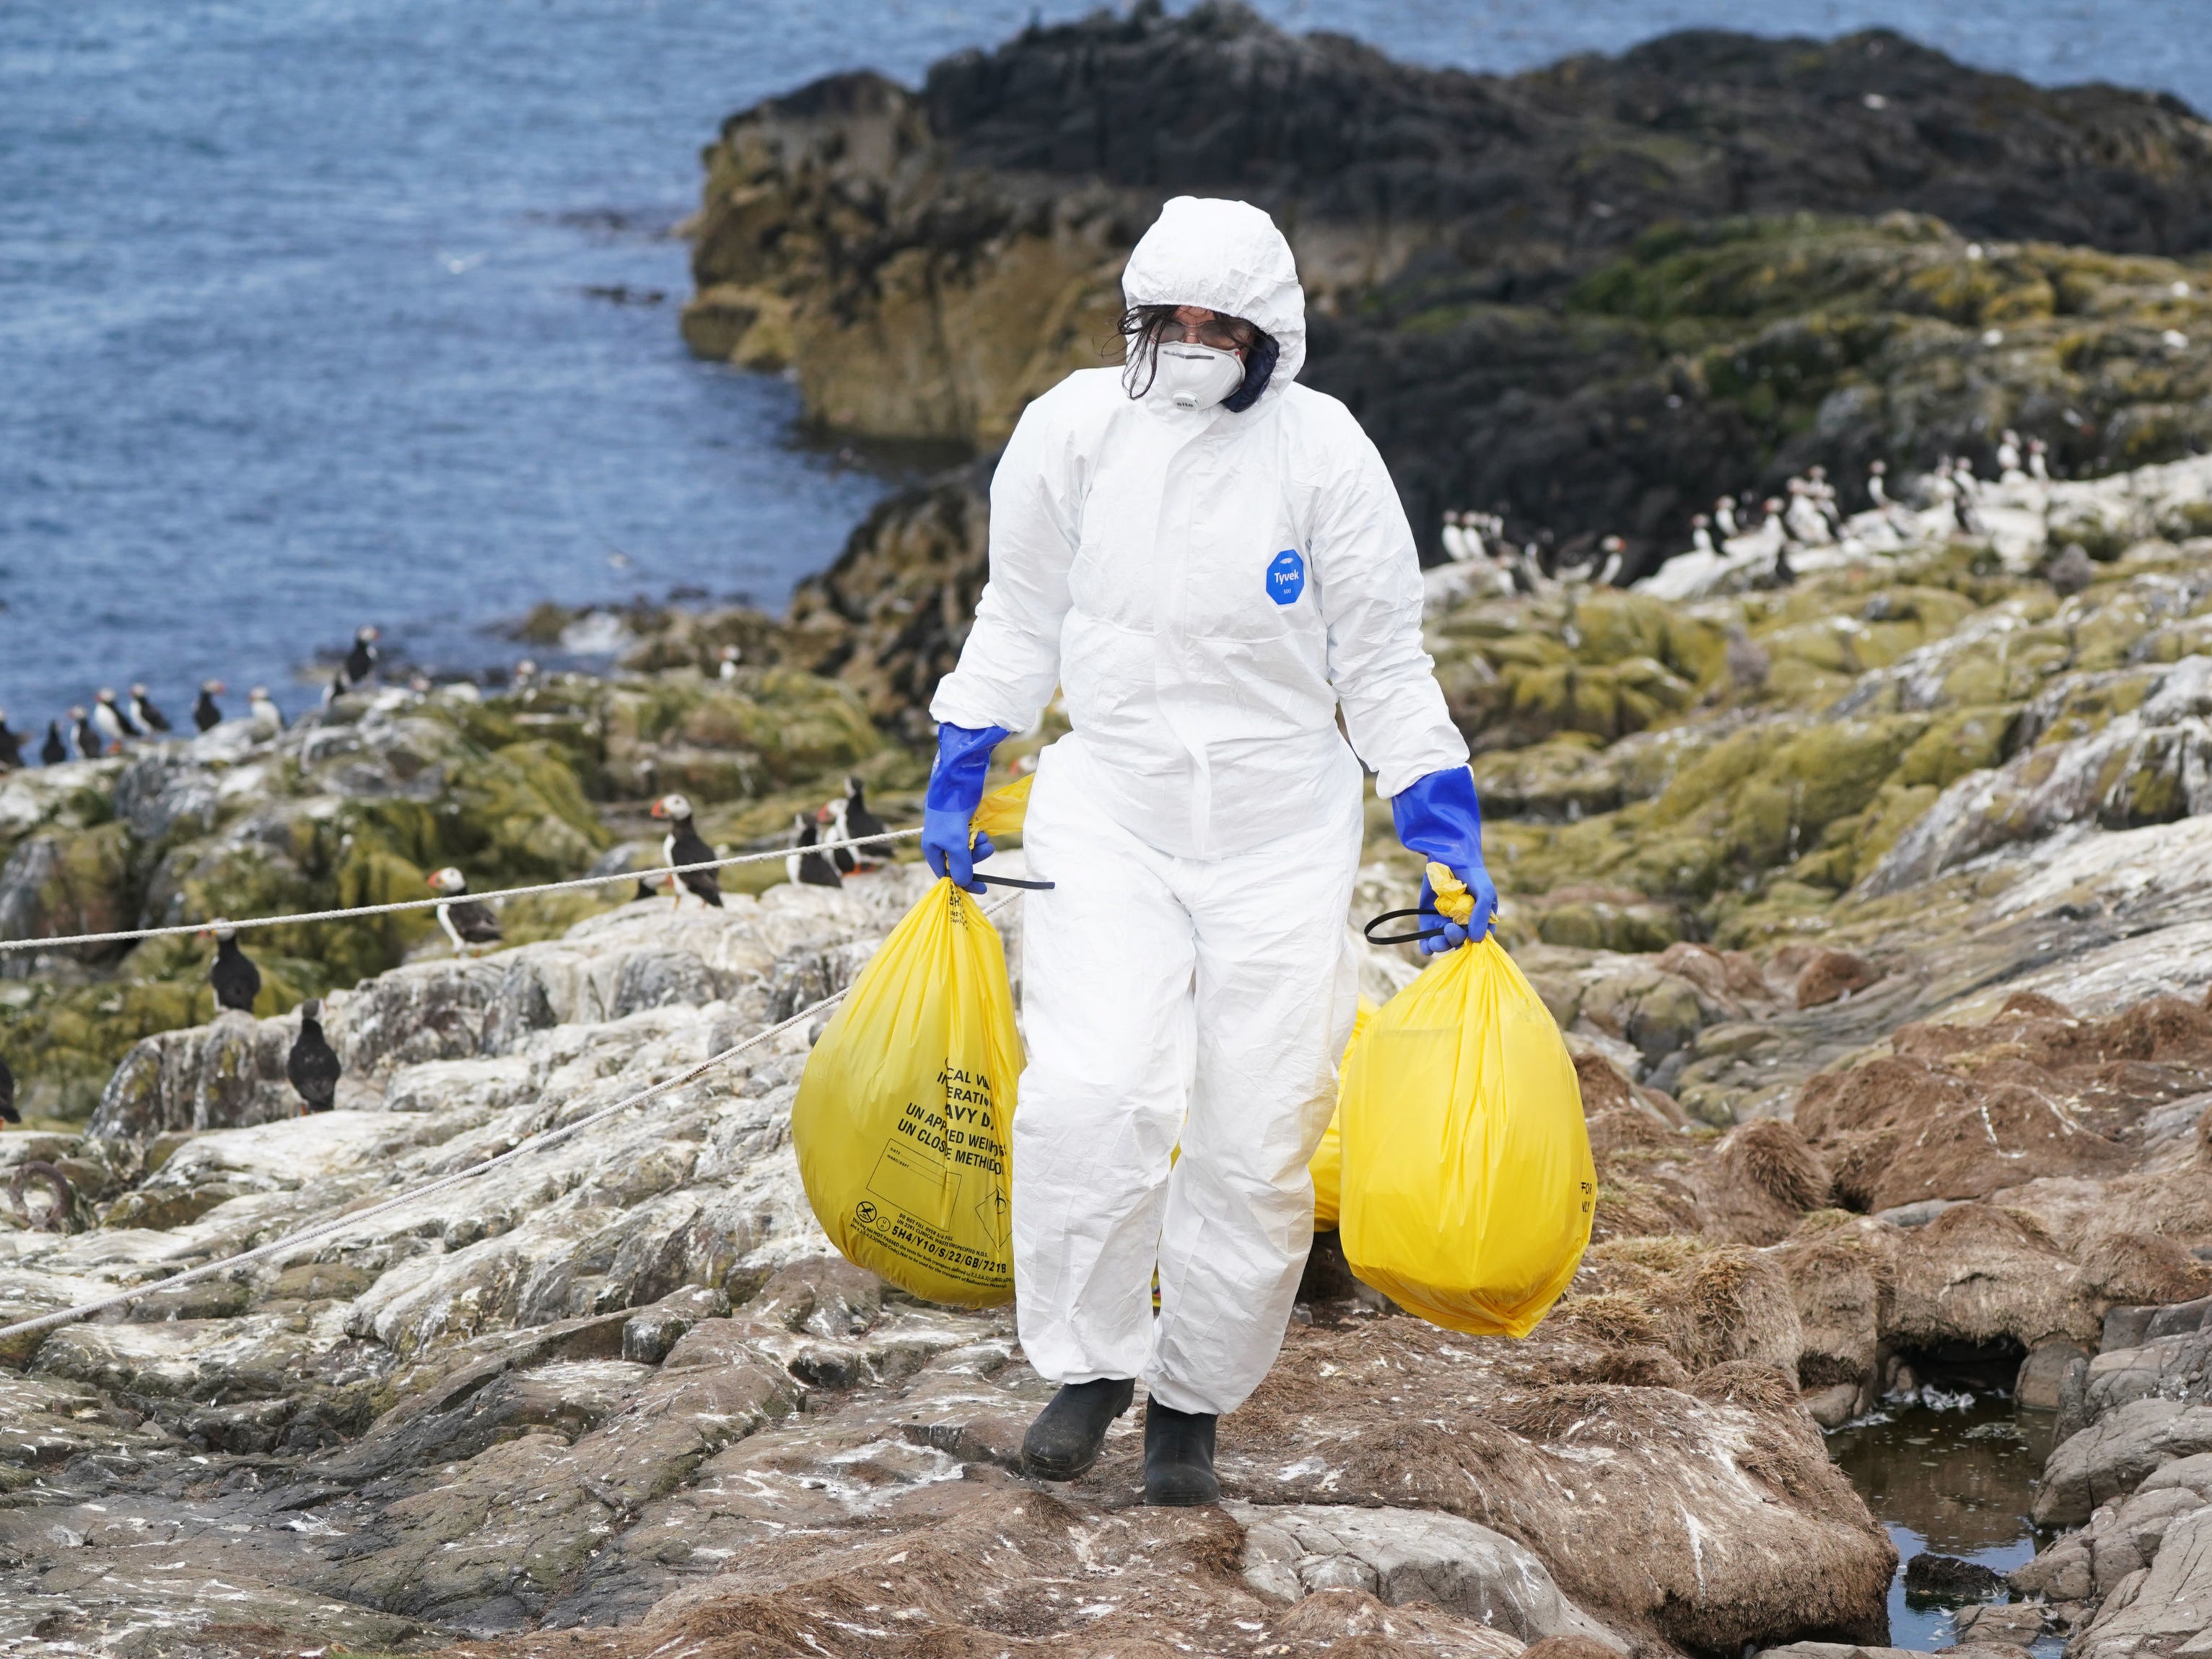 A National Trust ranger clears deceased birds from Staple Island, one of the Outer Group of the Farne Islands, off the coast of Northumberland, where the impact of Avian Influenza is having a devastating effect